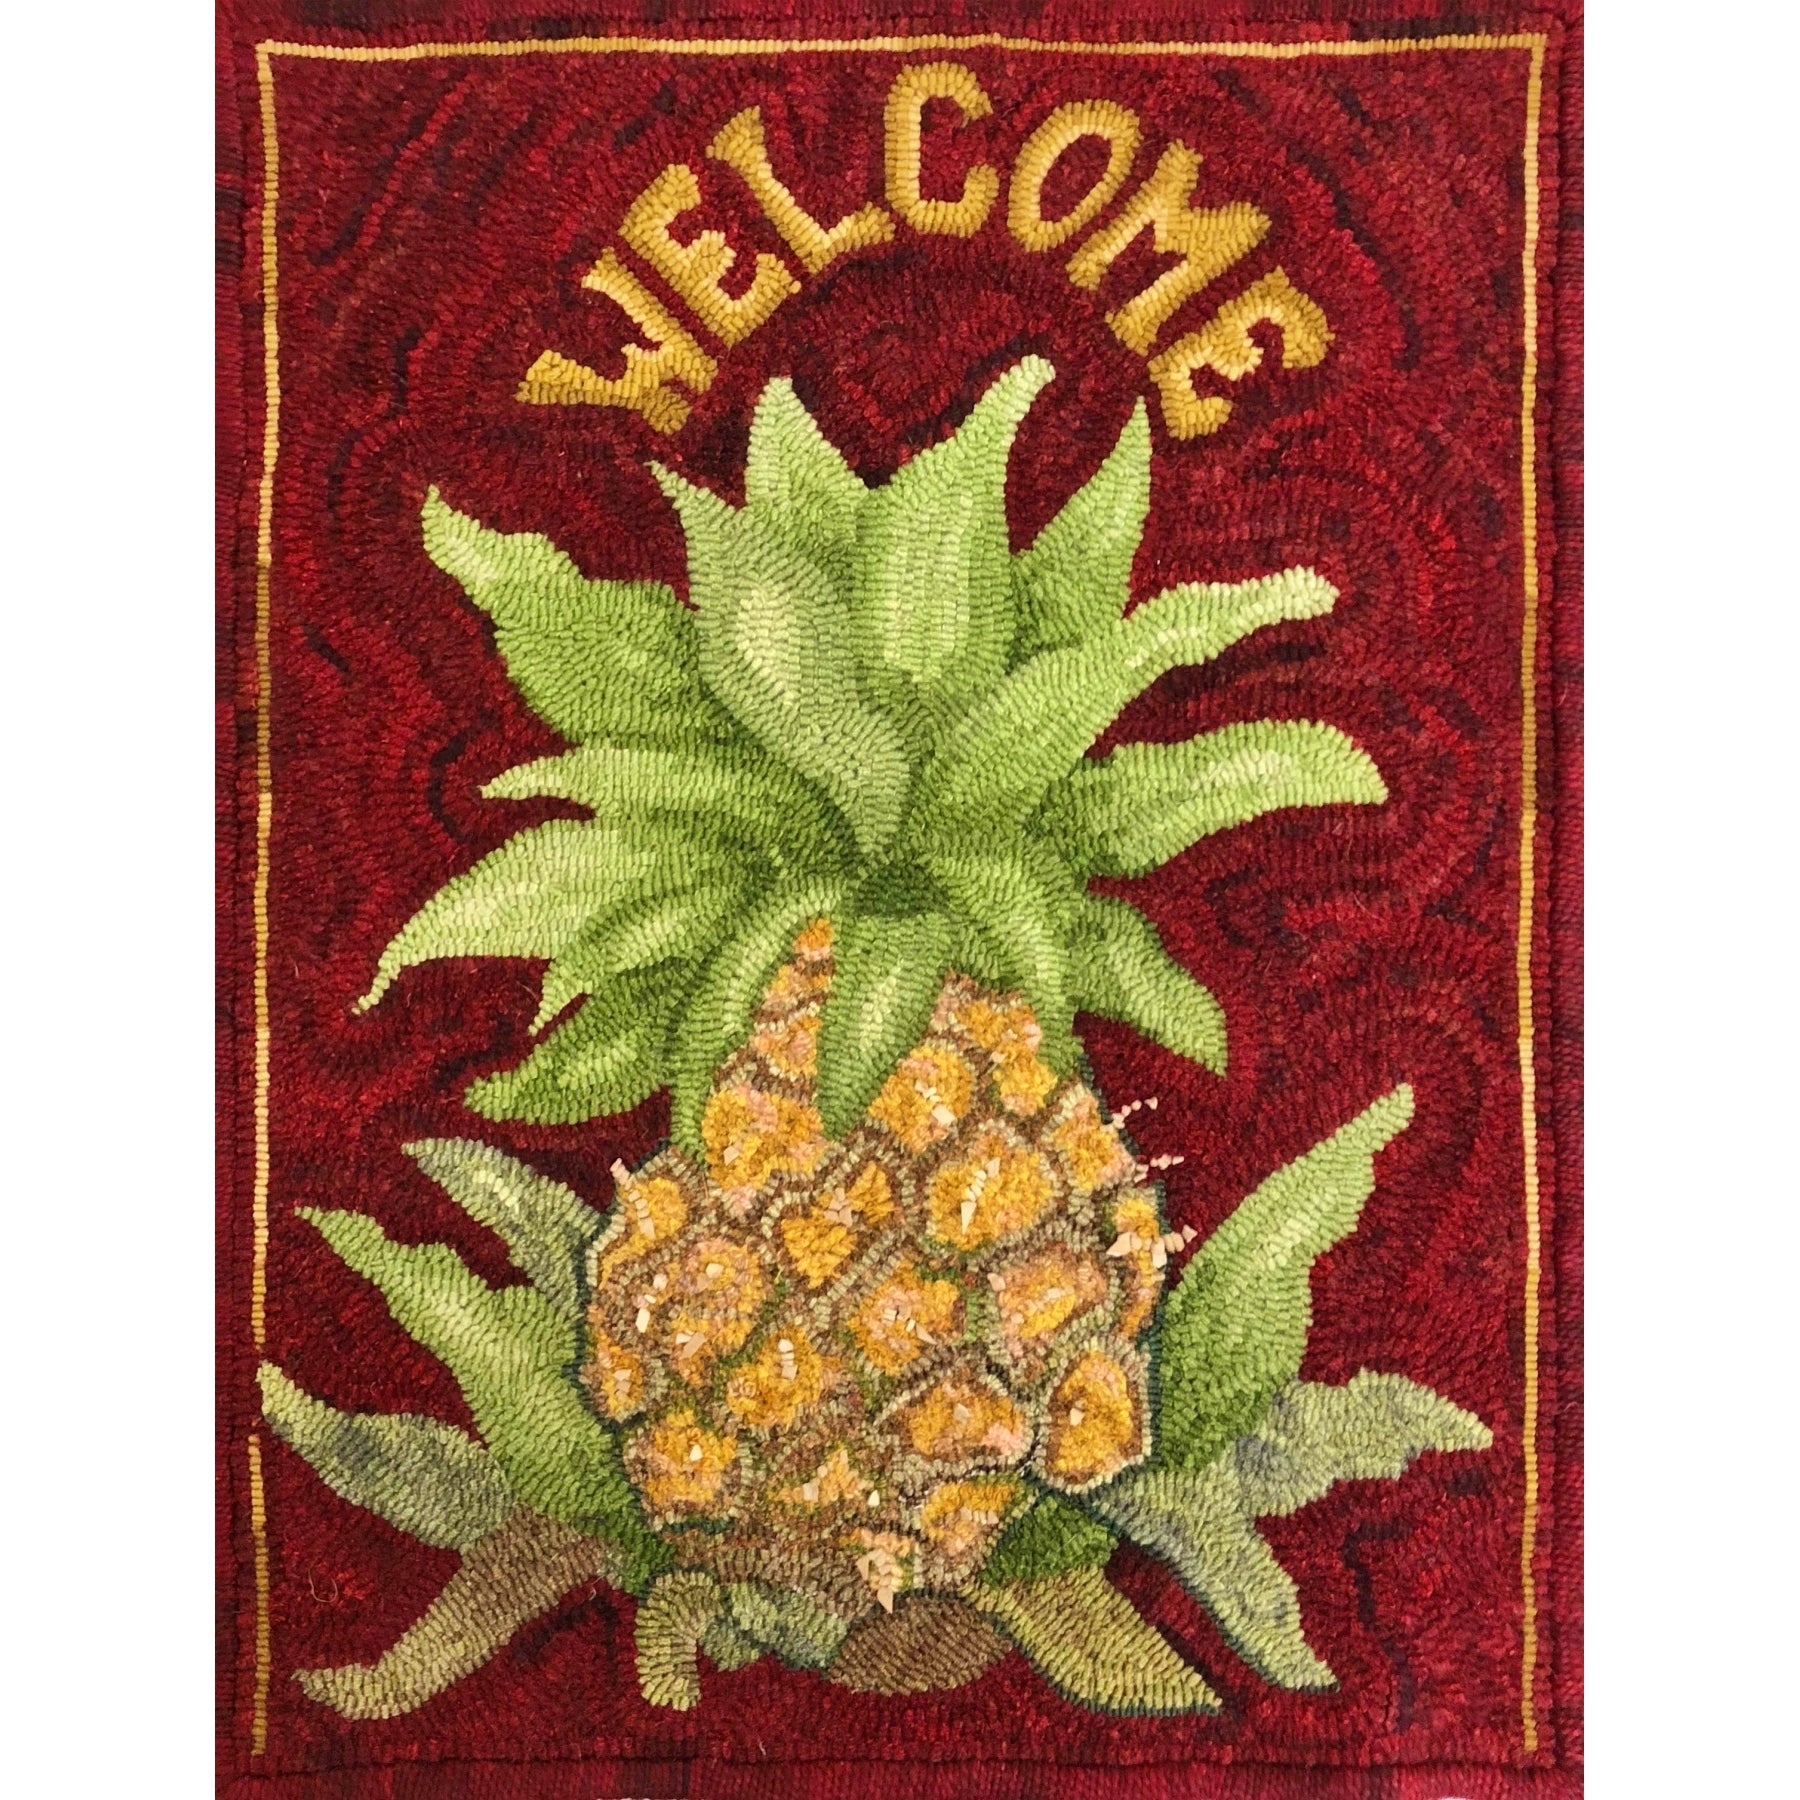 Hospitality Pineapple, rug hooked by Pat Murray